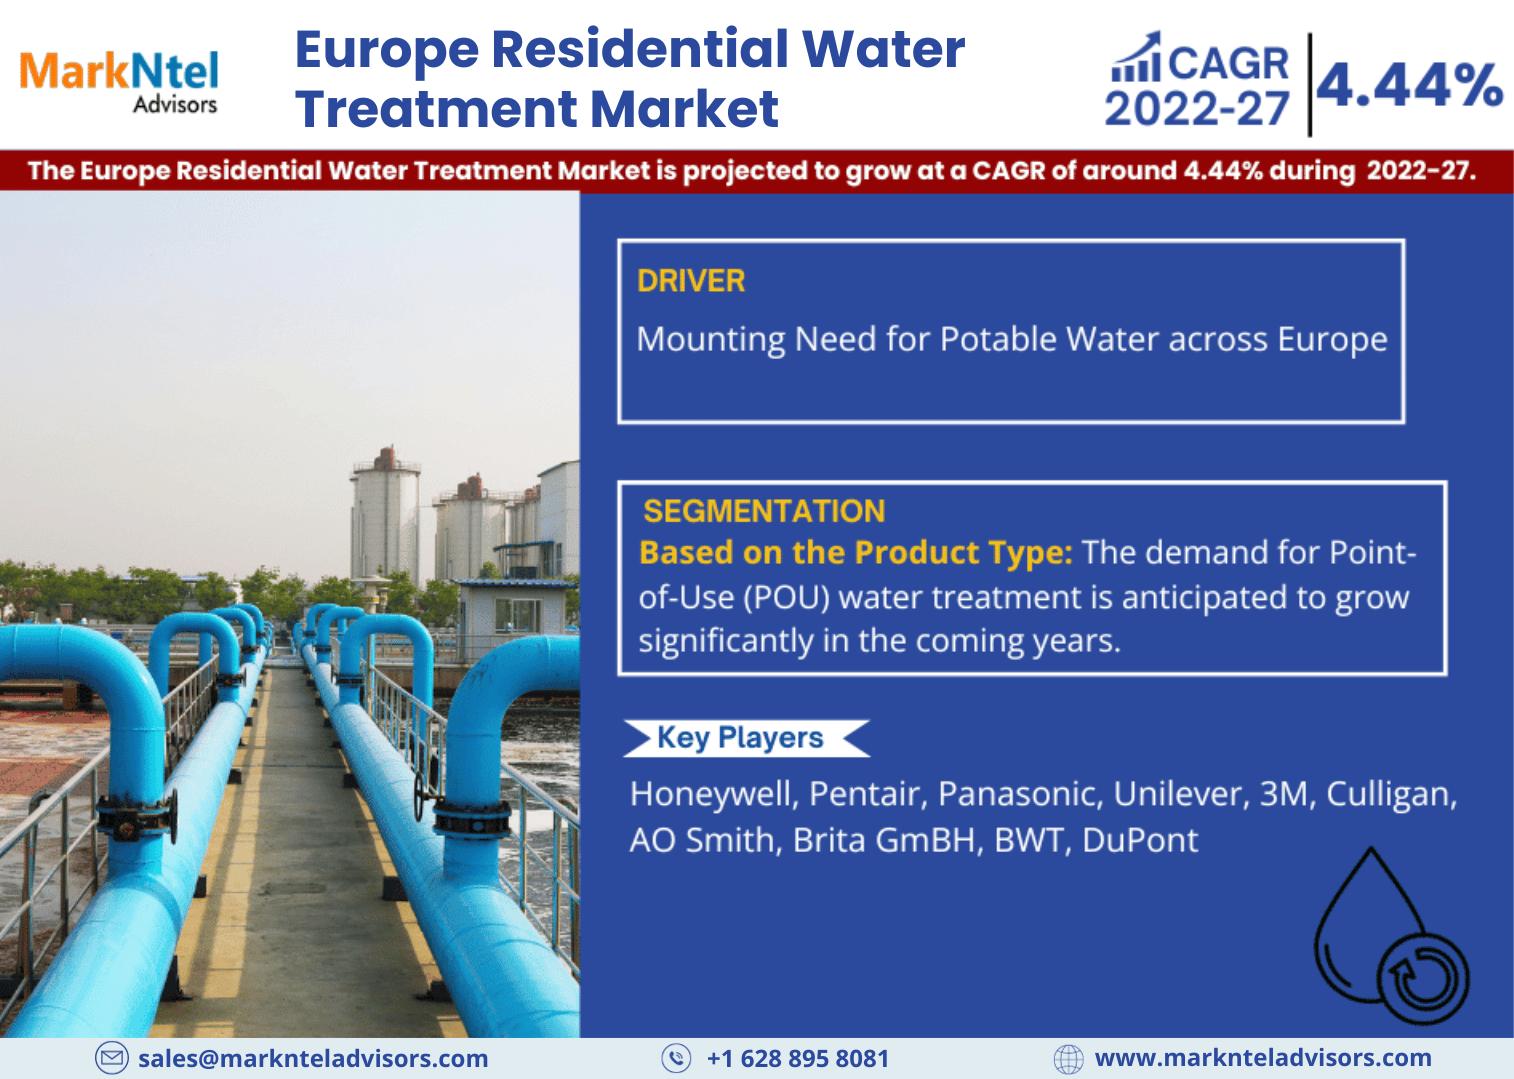 Europe Residential Water Treatment Market